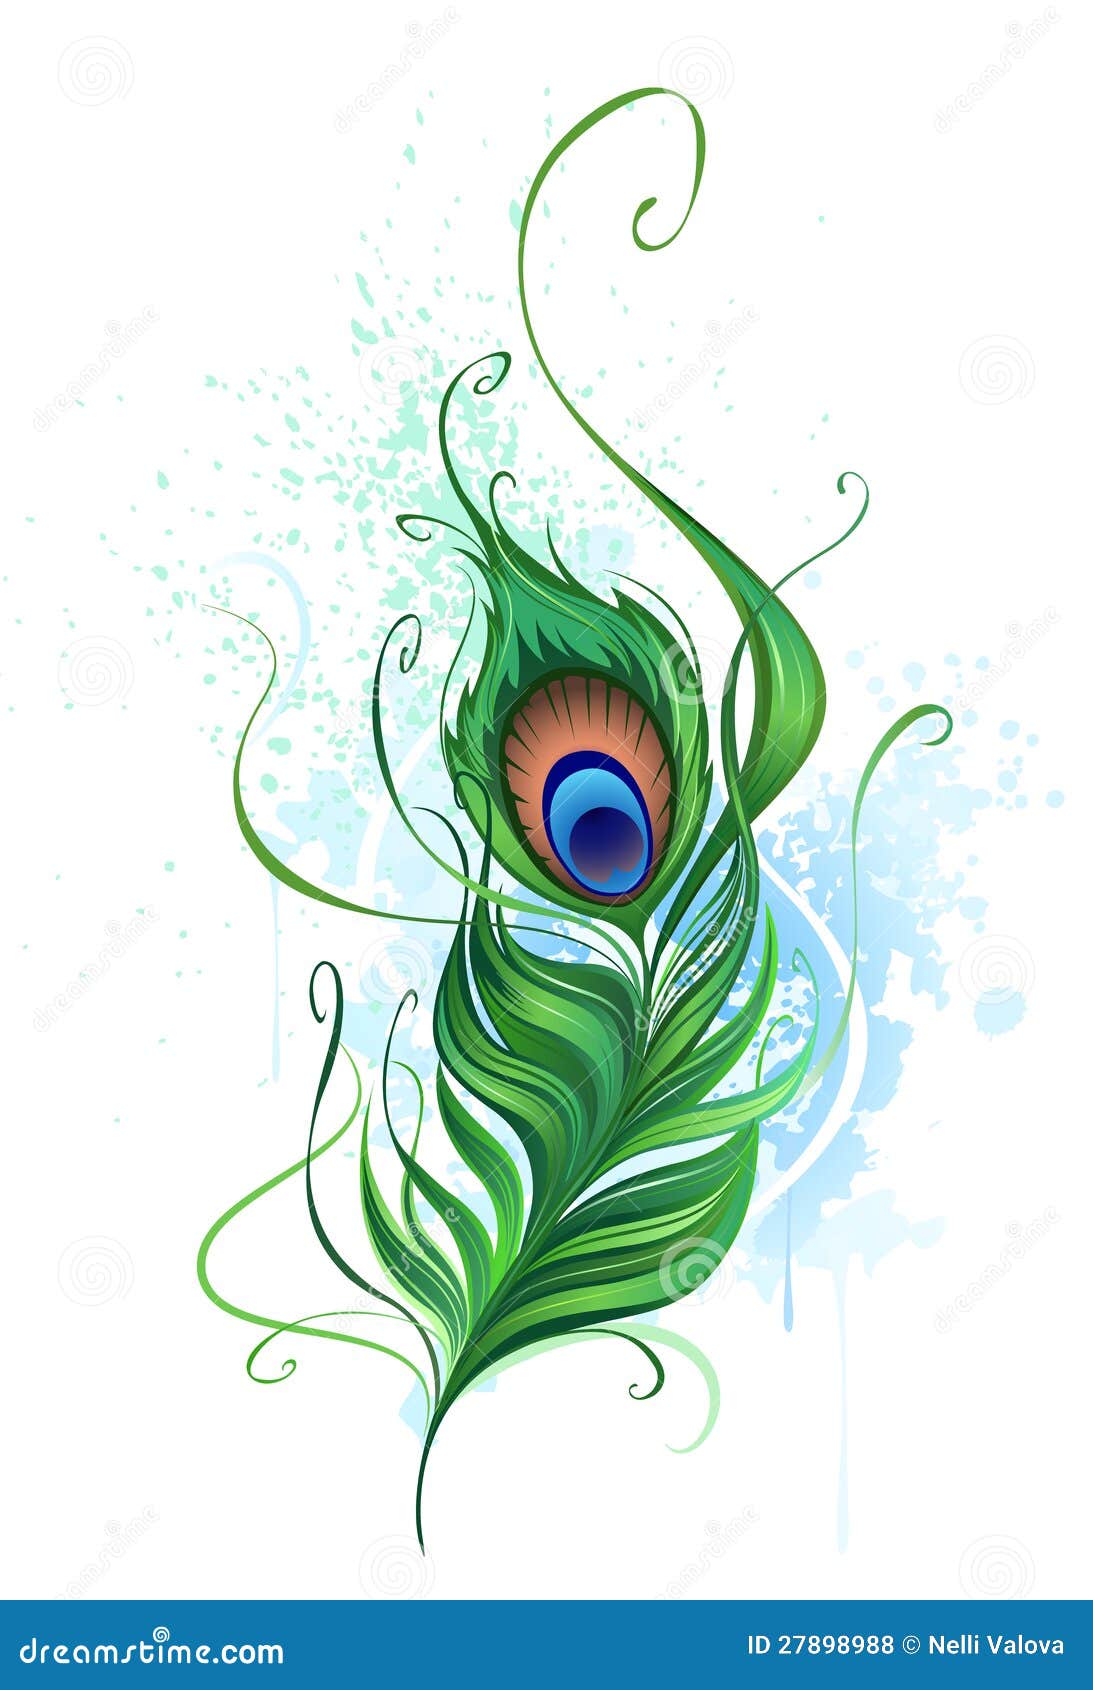 Peacock feather stock vector. Illustration of background - 27898988